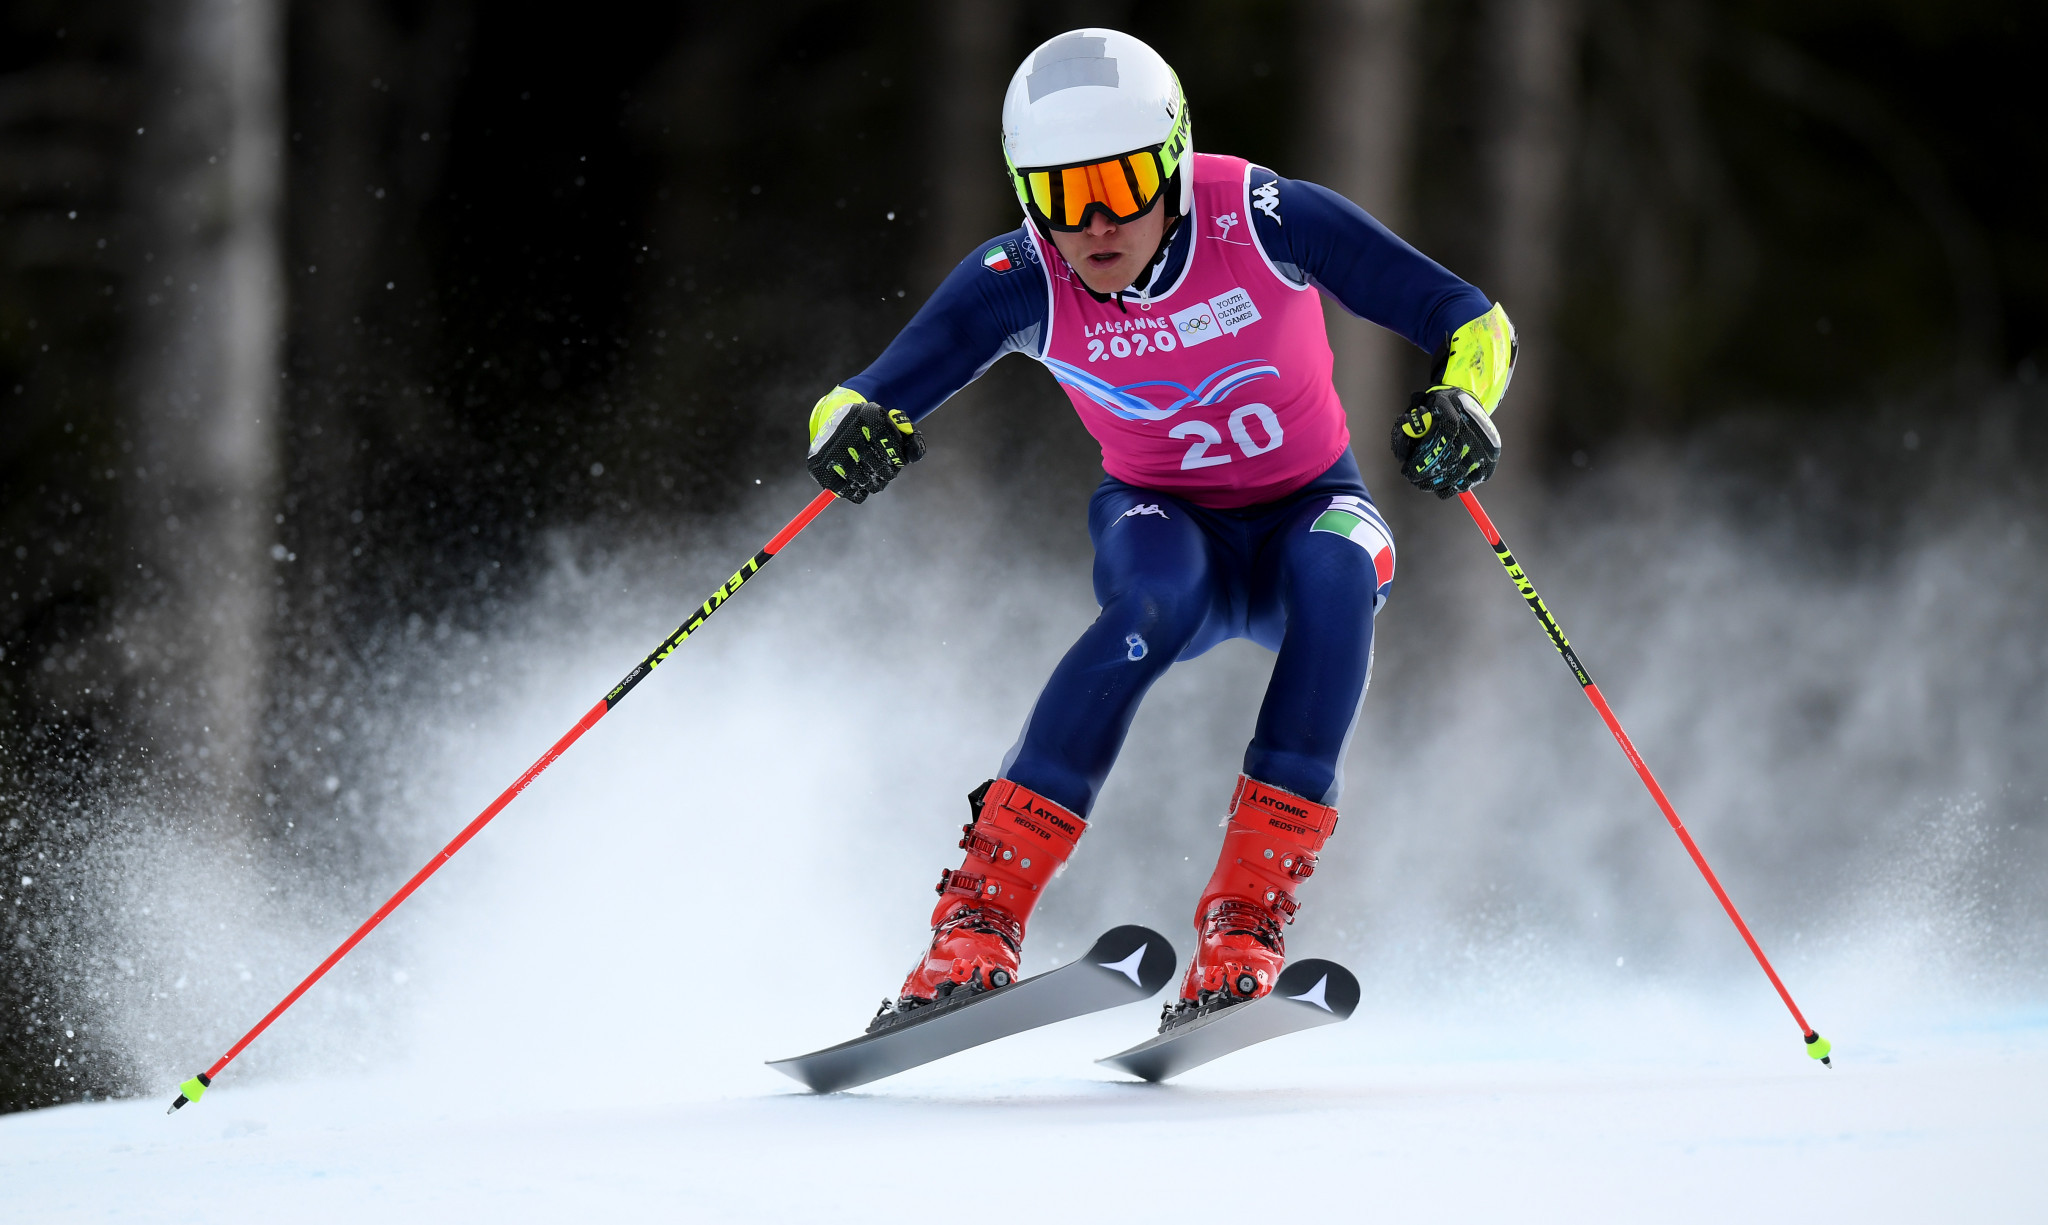 Olivier prevails in all-Austrian final to claim girls' parallel slalom title at Winter EYOF